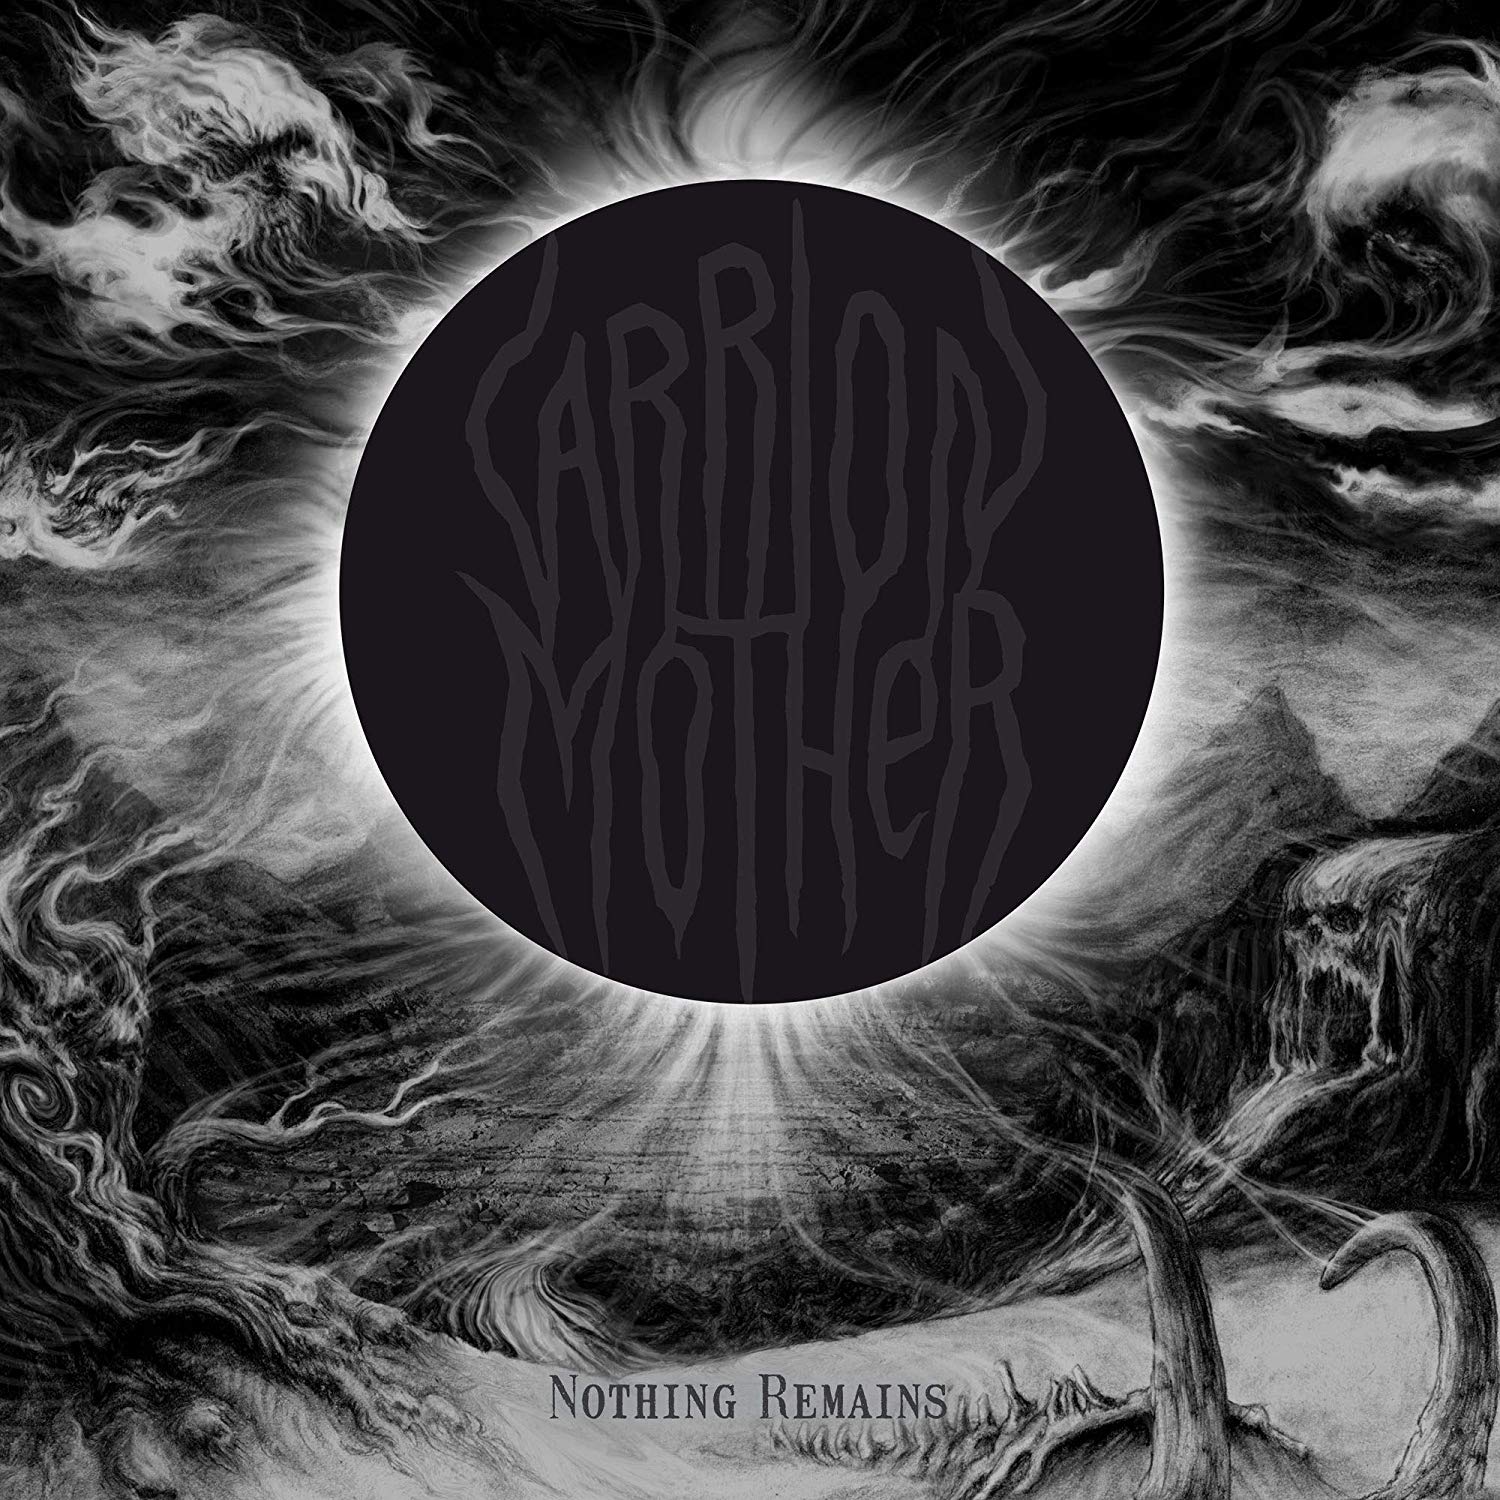 Carrion Mother - Nothing Remains vinyl cover